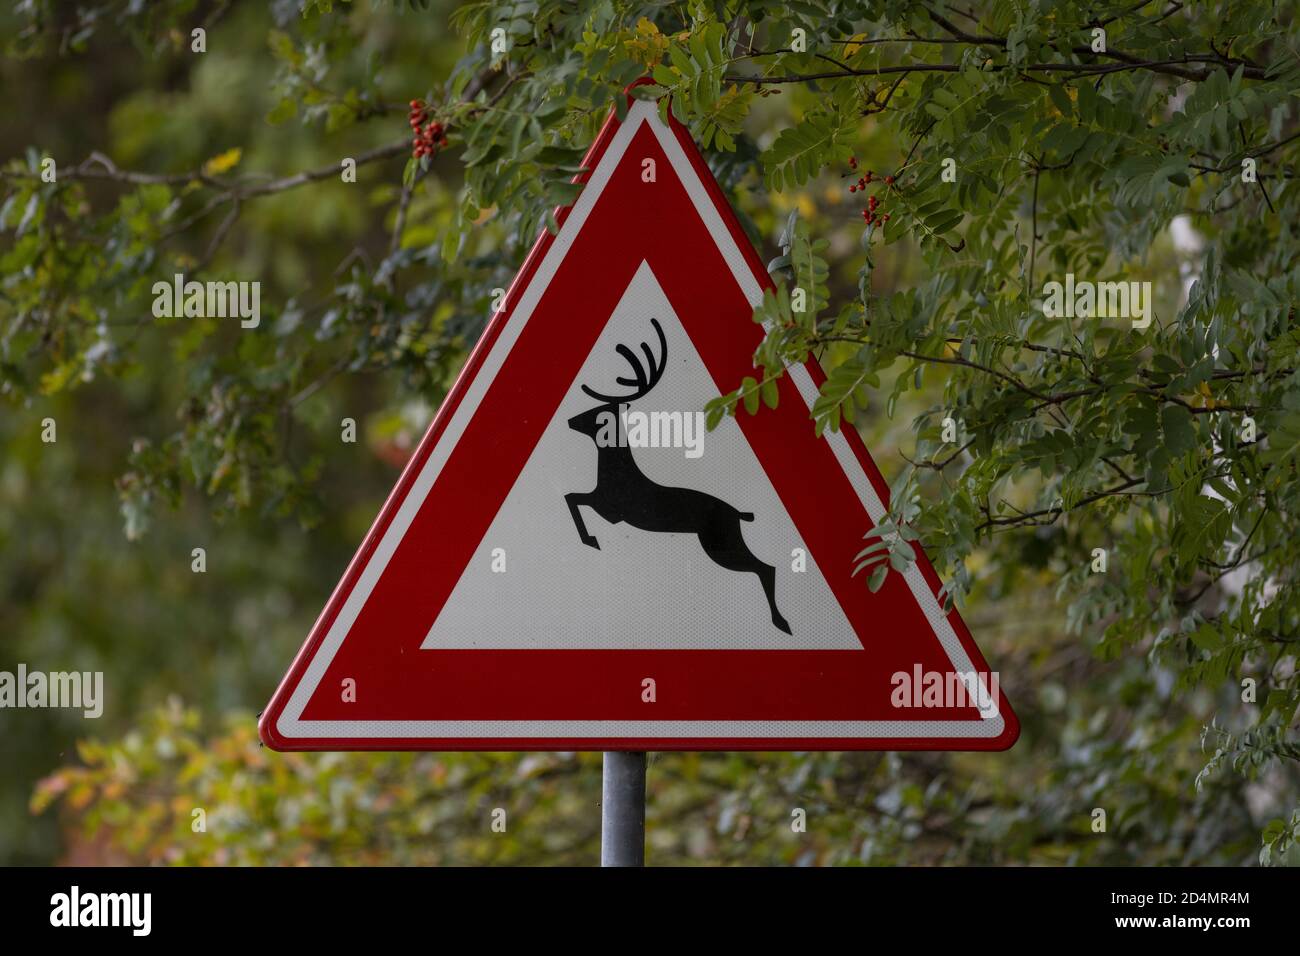 HOGE HEXEL, NETHERLANDS - Oct 02, 2020: Dutch traffic sign on the side of the road with a deer and red triangle warning for wildlife to cross the stre Stock Photo